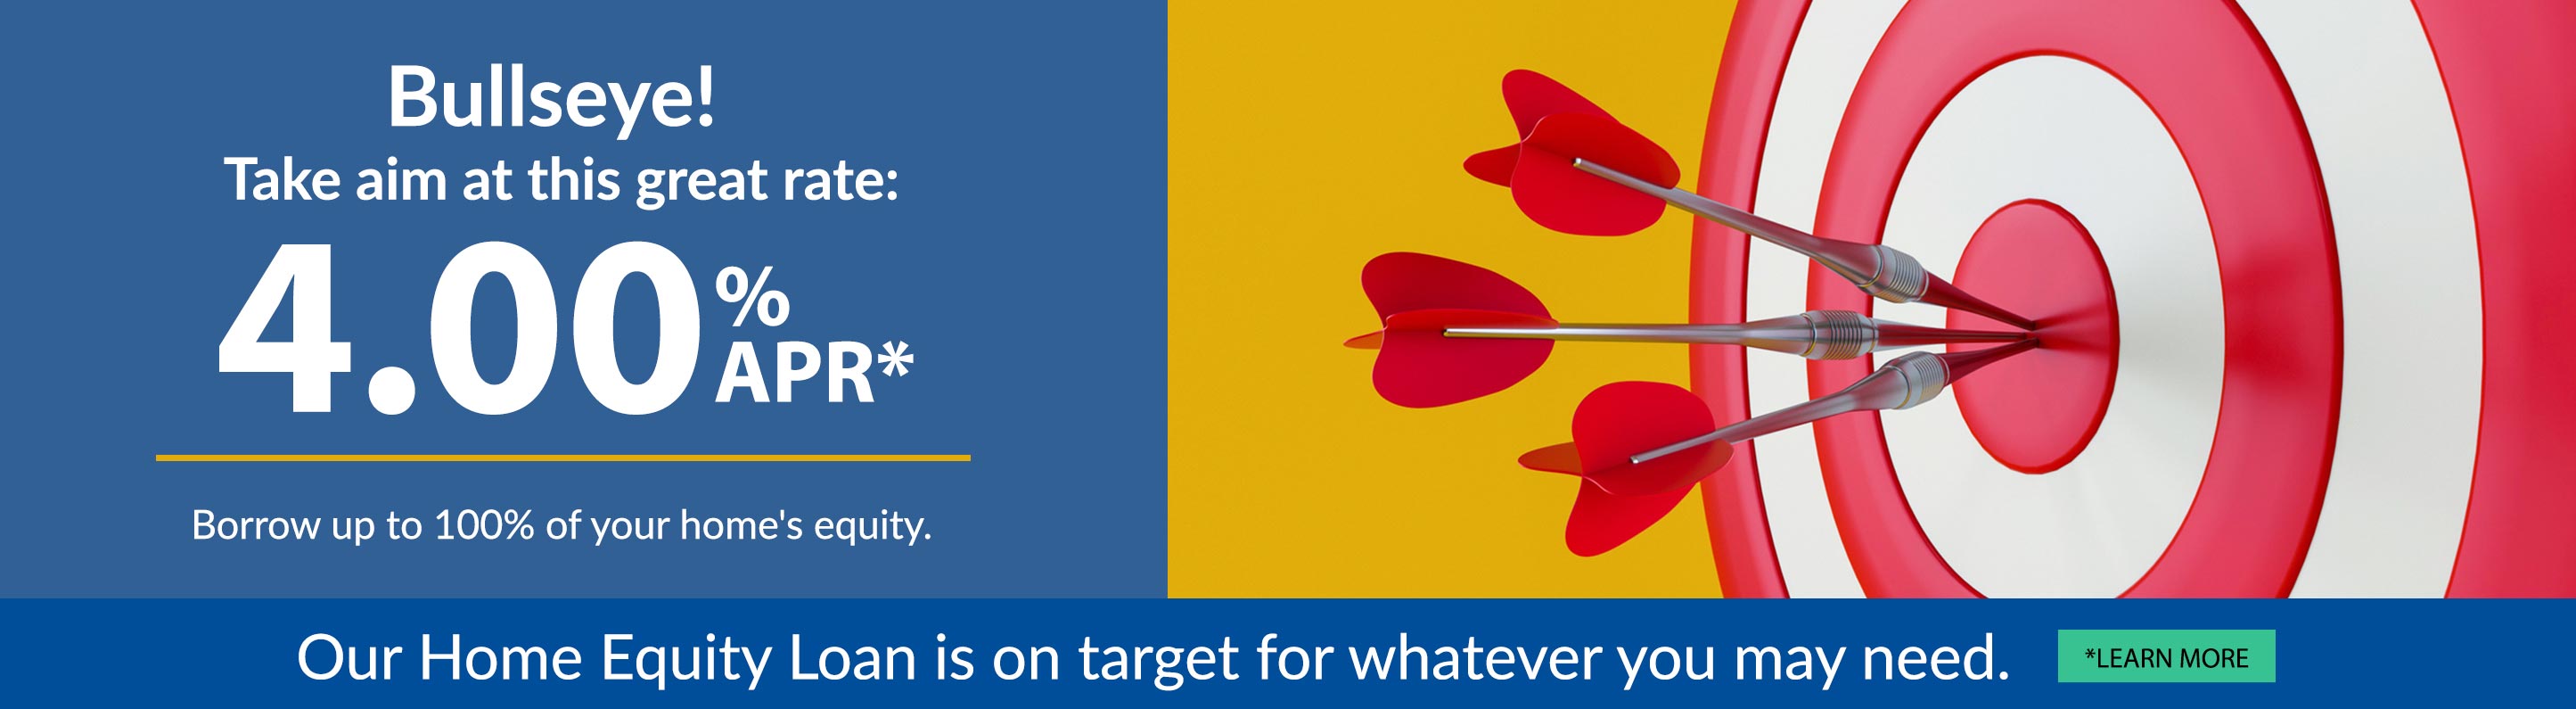 Bullseye! Take aim at this great rate: 4.00% apr. Borrow up to 100% of your home's equity. Our Home Equity Loan is on target for whatever you may need. Learn more